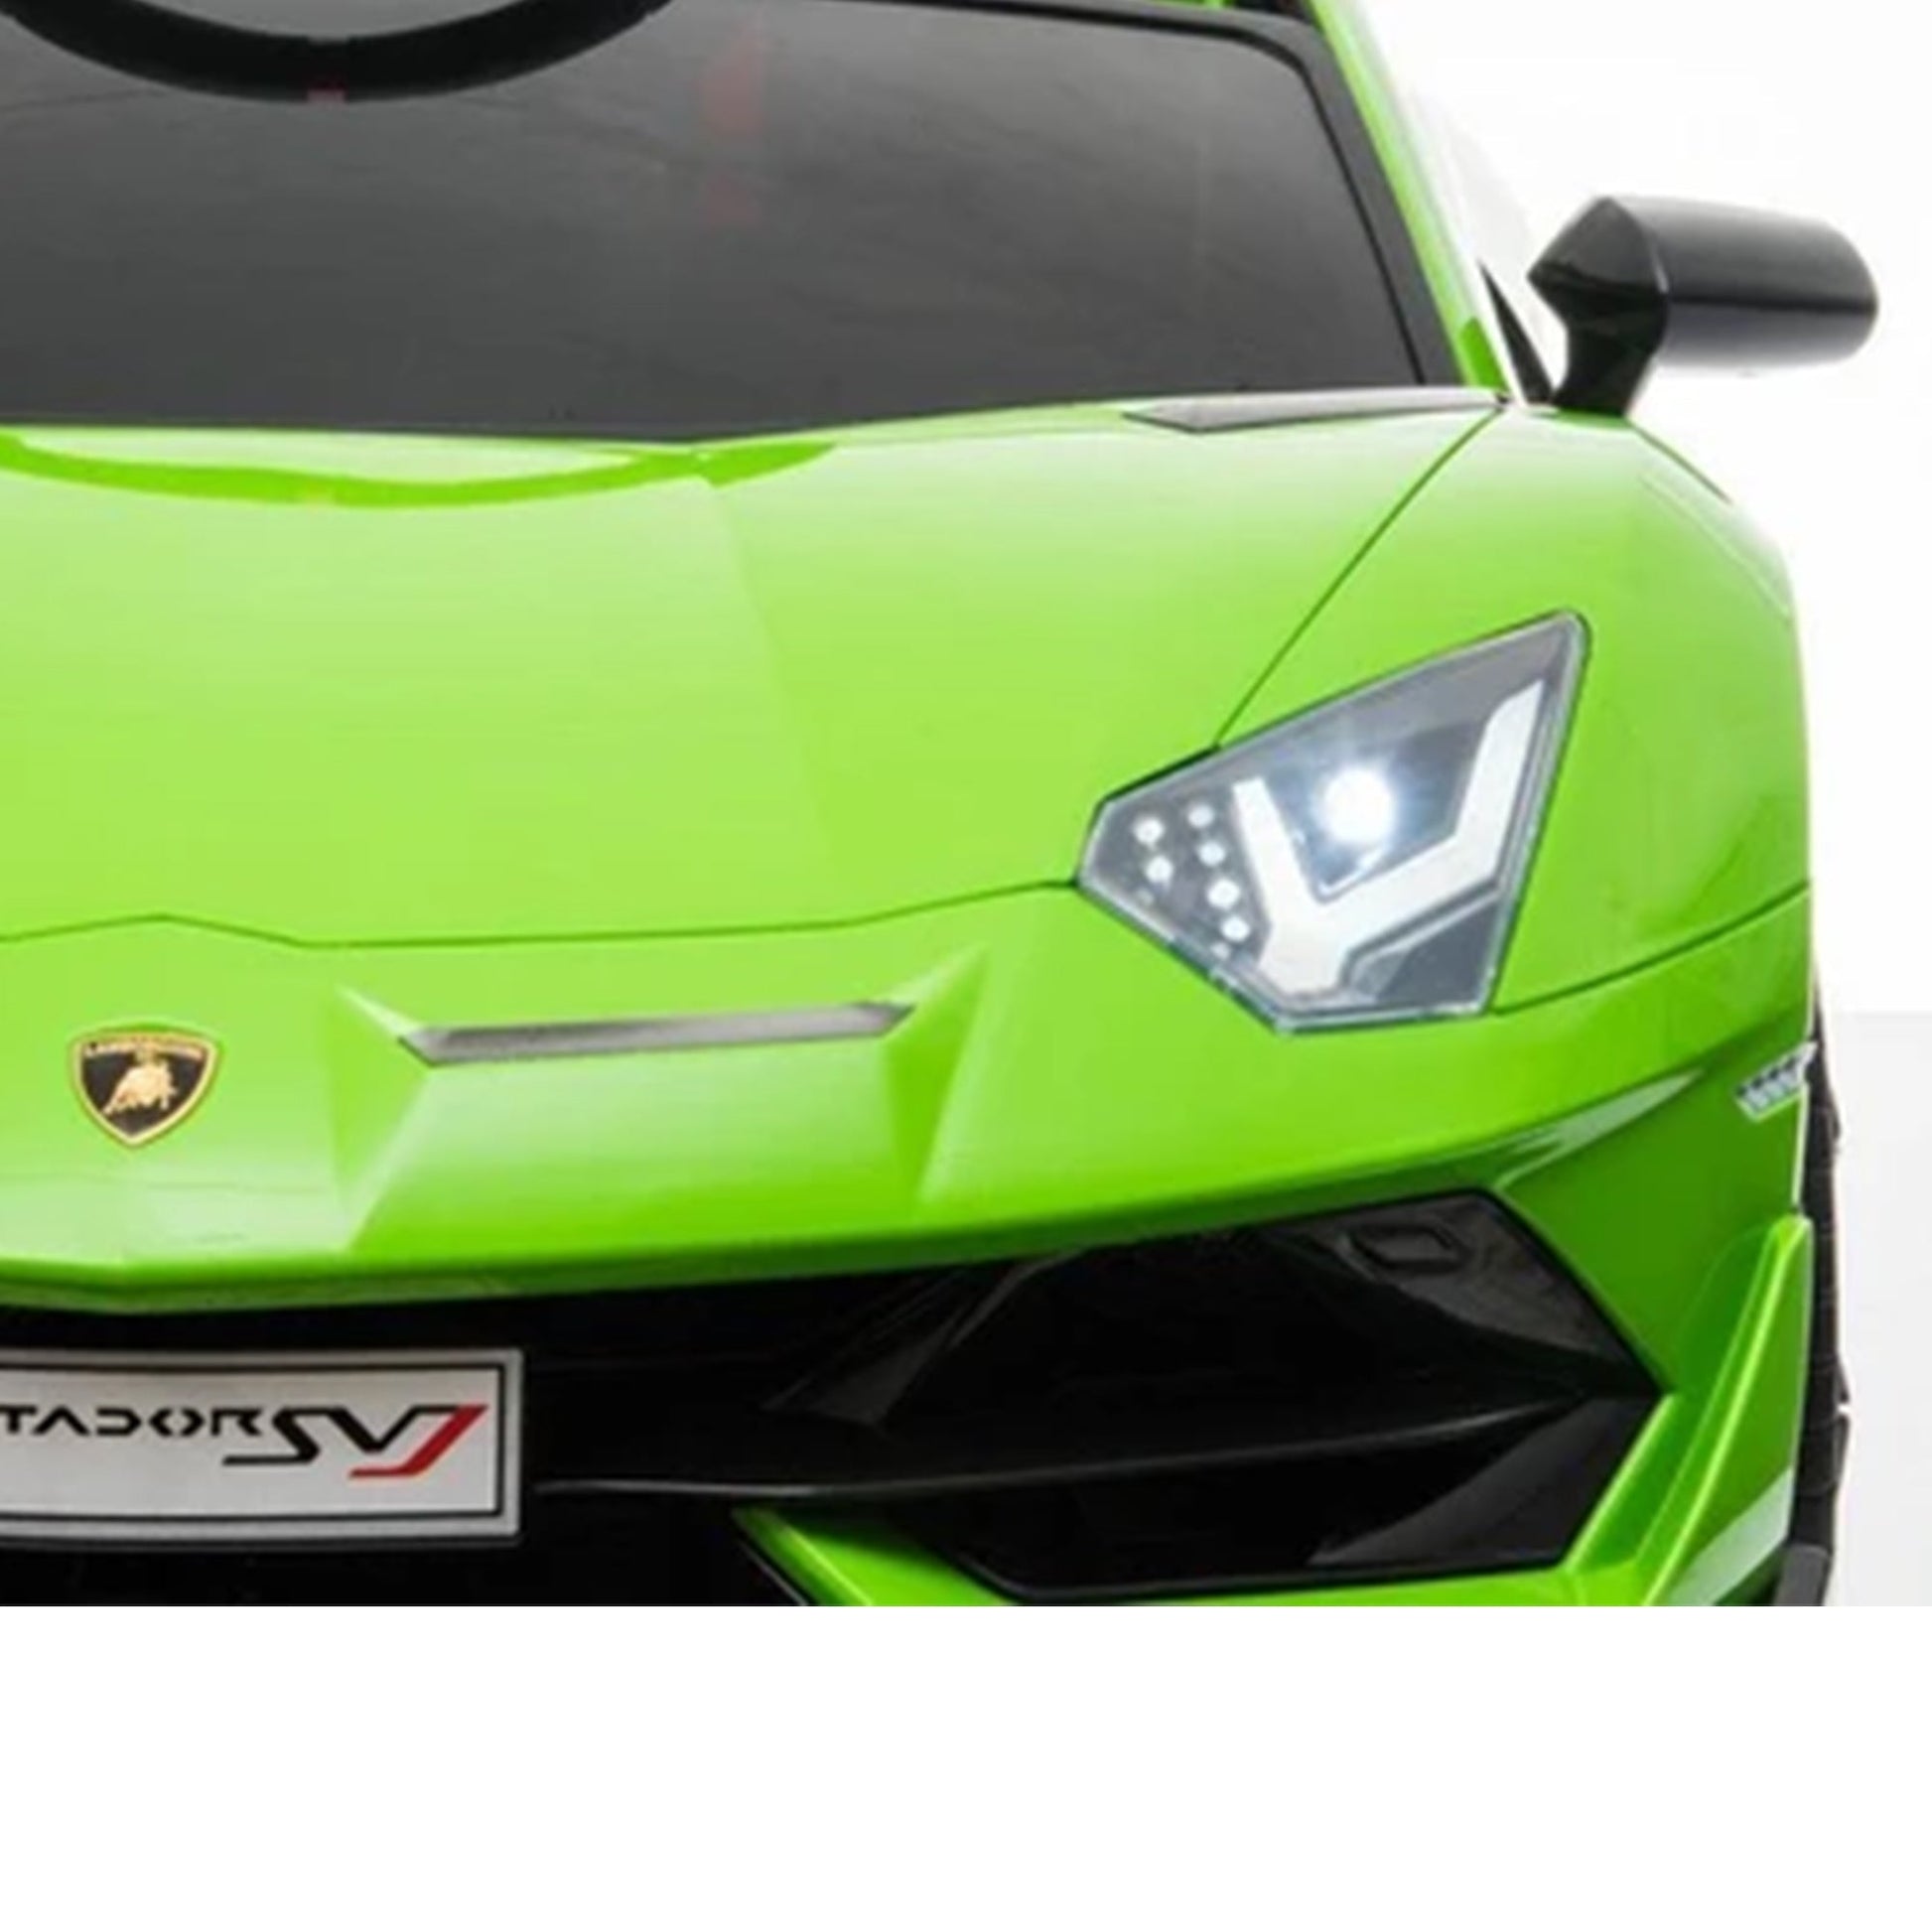 "Official Green Lamborghini SVJ Ride On from Kids Car Store, 12V with Parental Remote Control on a white background."
